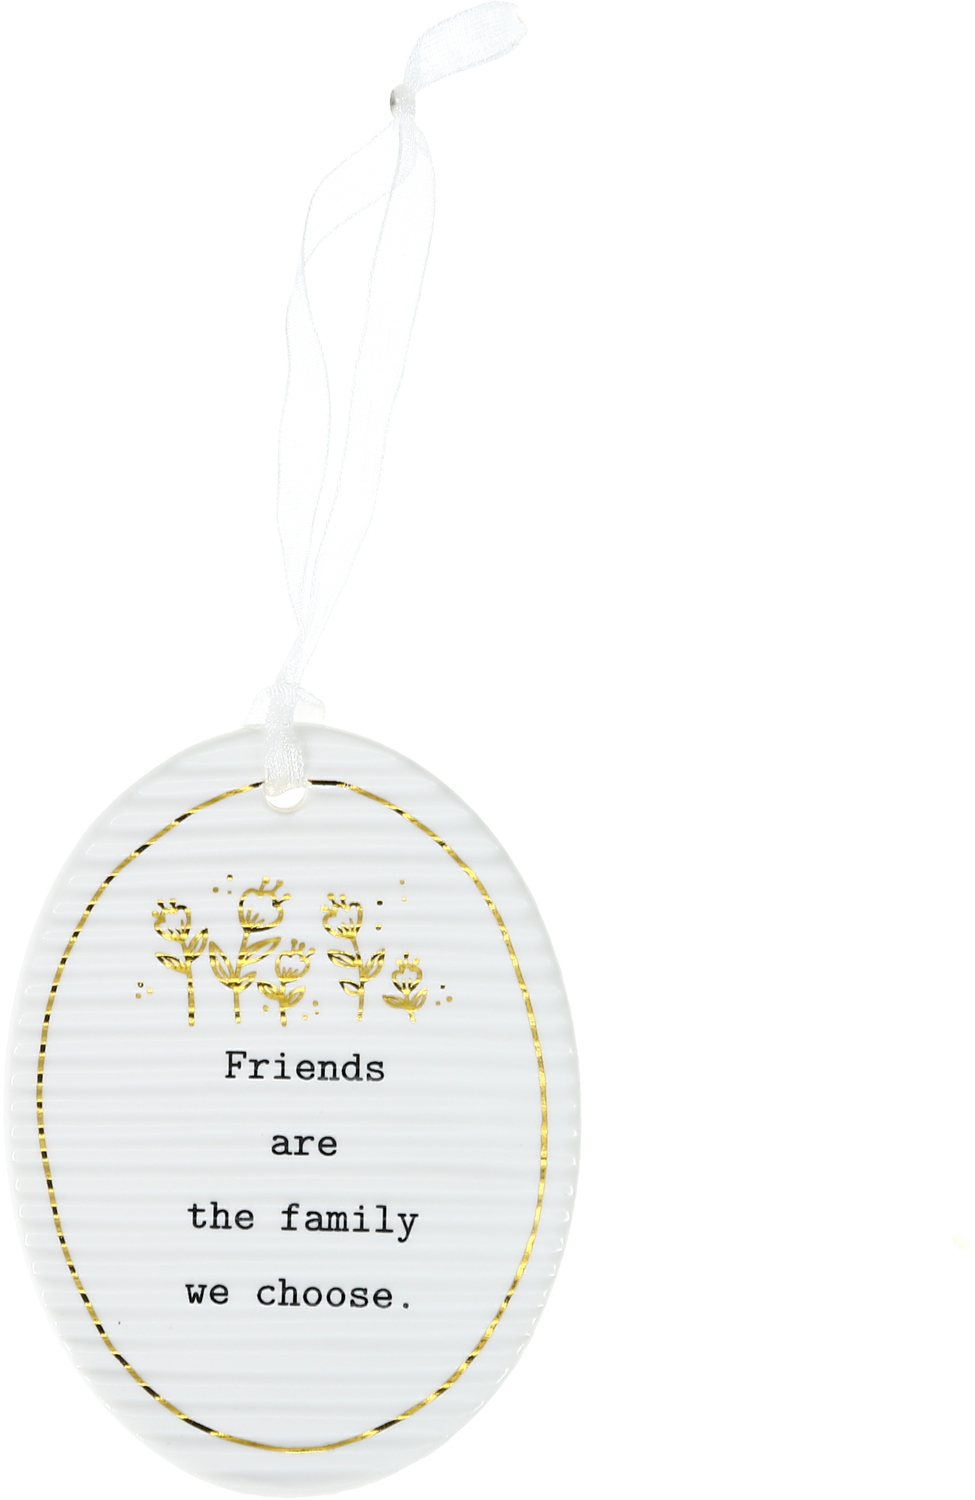 Family We Choose by Thoughtful Words - Family We Choose - 3.5" Hanging Oval Plaque